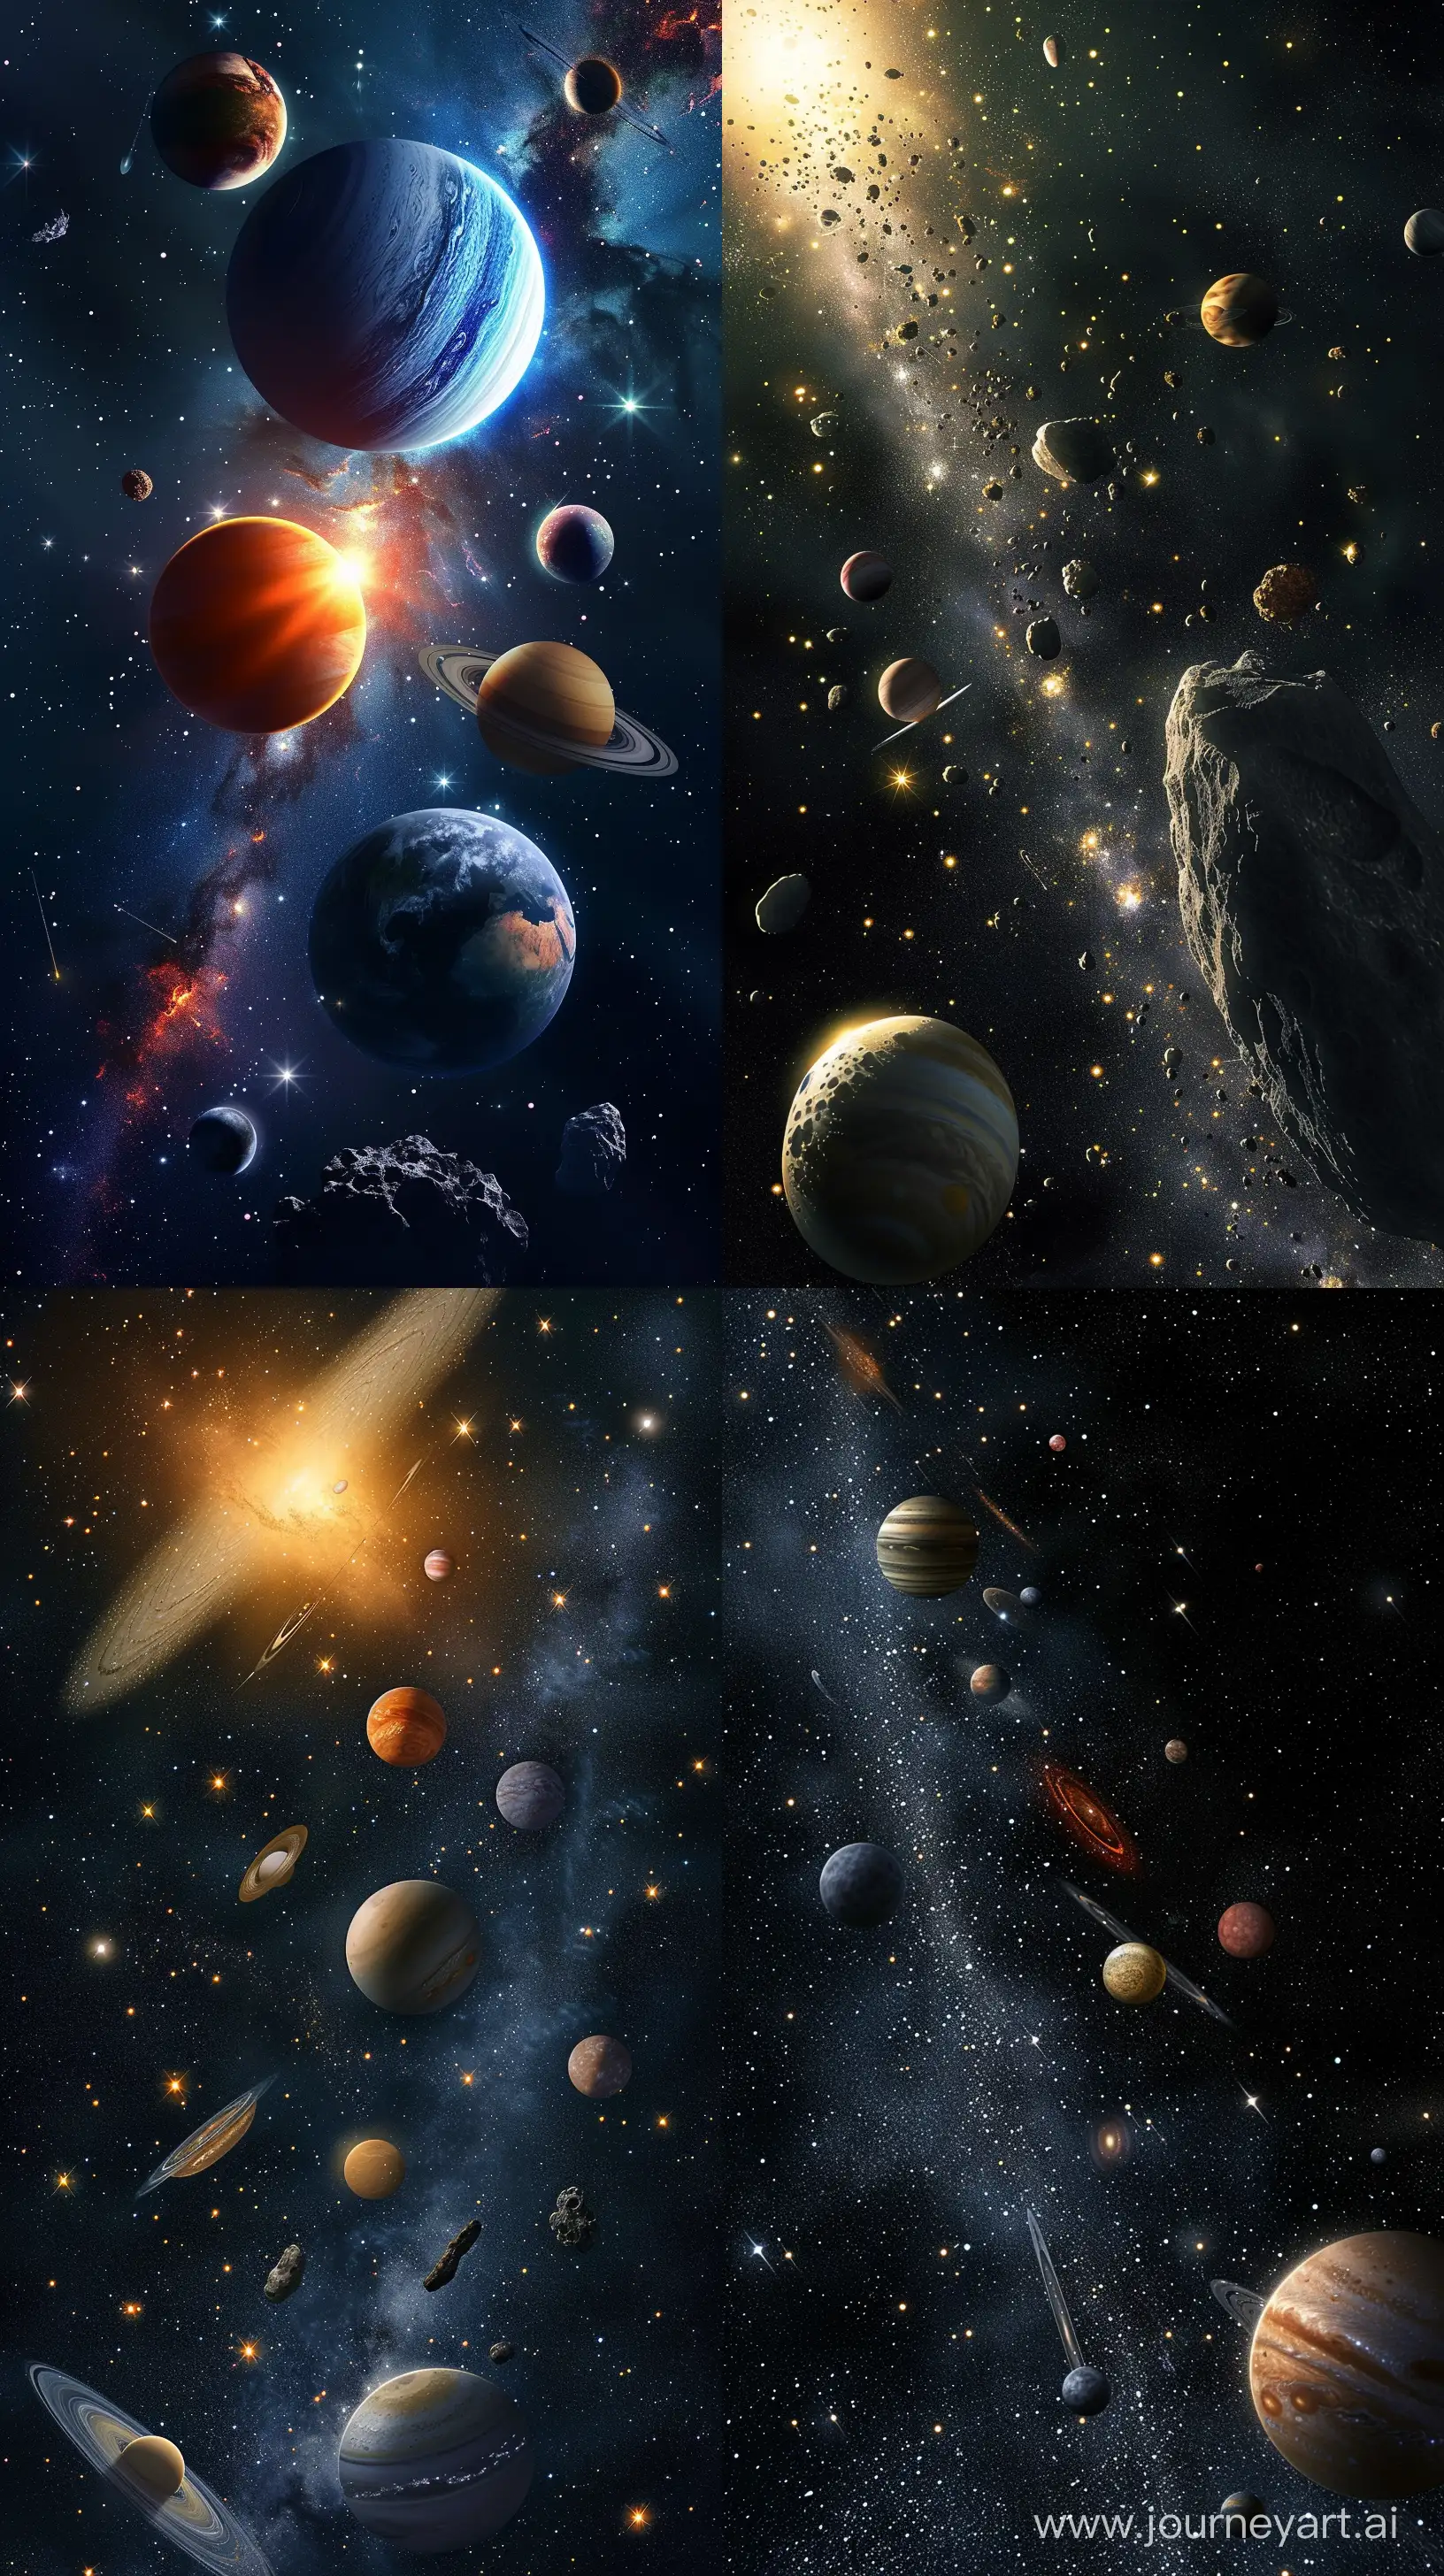 Stunning-Realistic-Cosmos-Art-with-Stars-Planets-and-Asteroids-in-UHD